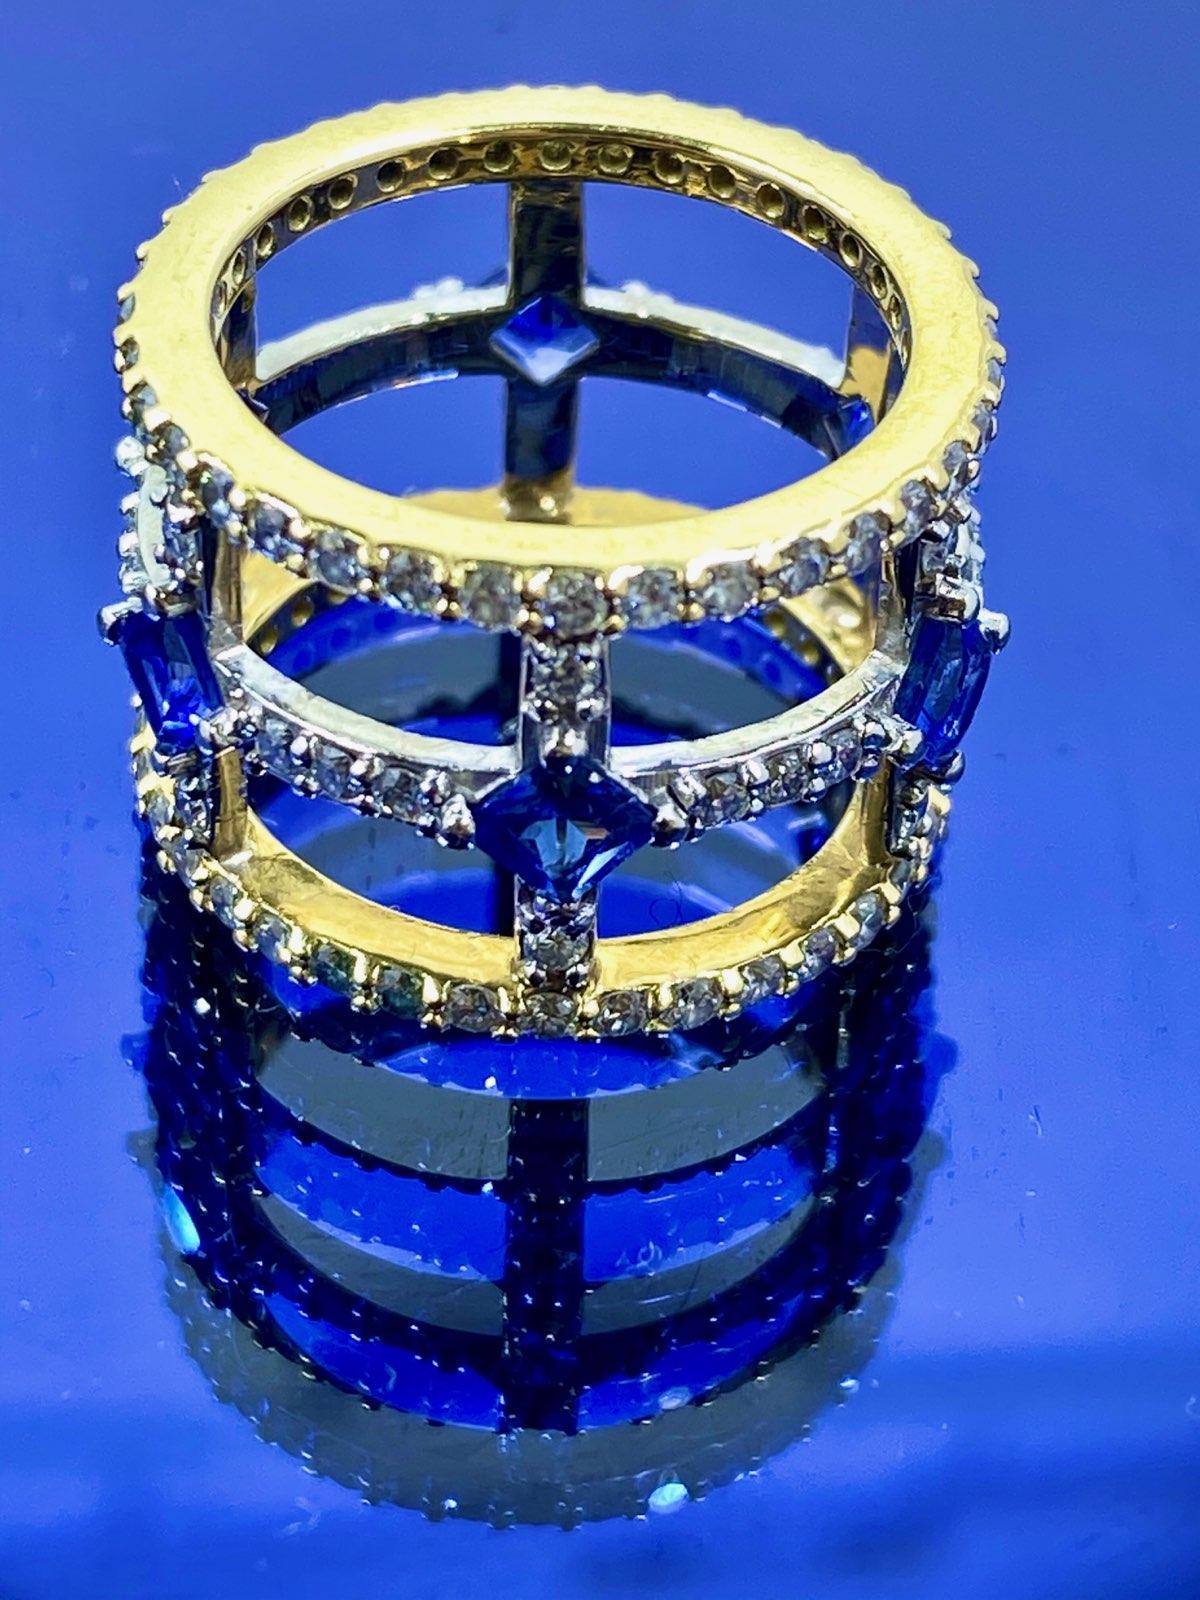 18k White & Yellow Gold with White Diamonds & Princess Cut Sapphires 3.41tw

I was inspired by the iron fencing while on a tour in the garden district of New Orleans when I started designing my first collection.  You really get a feel of the